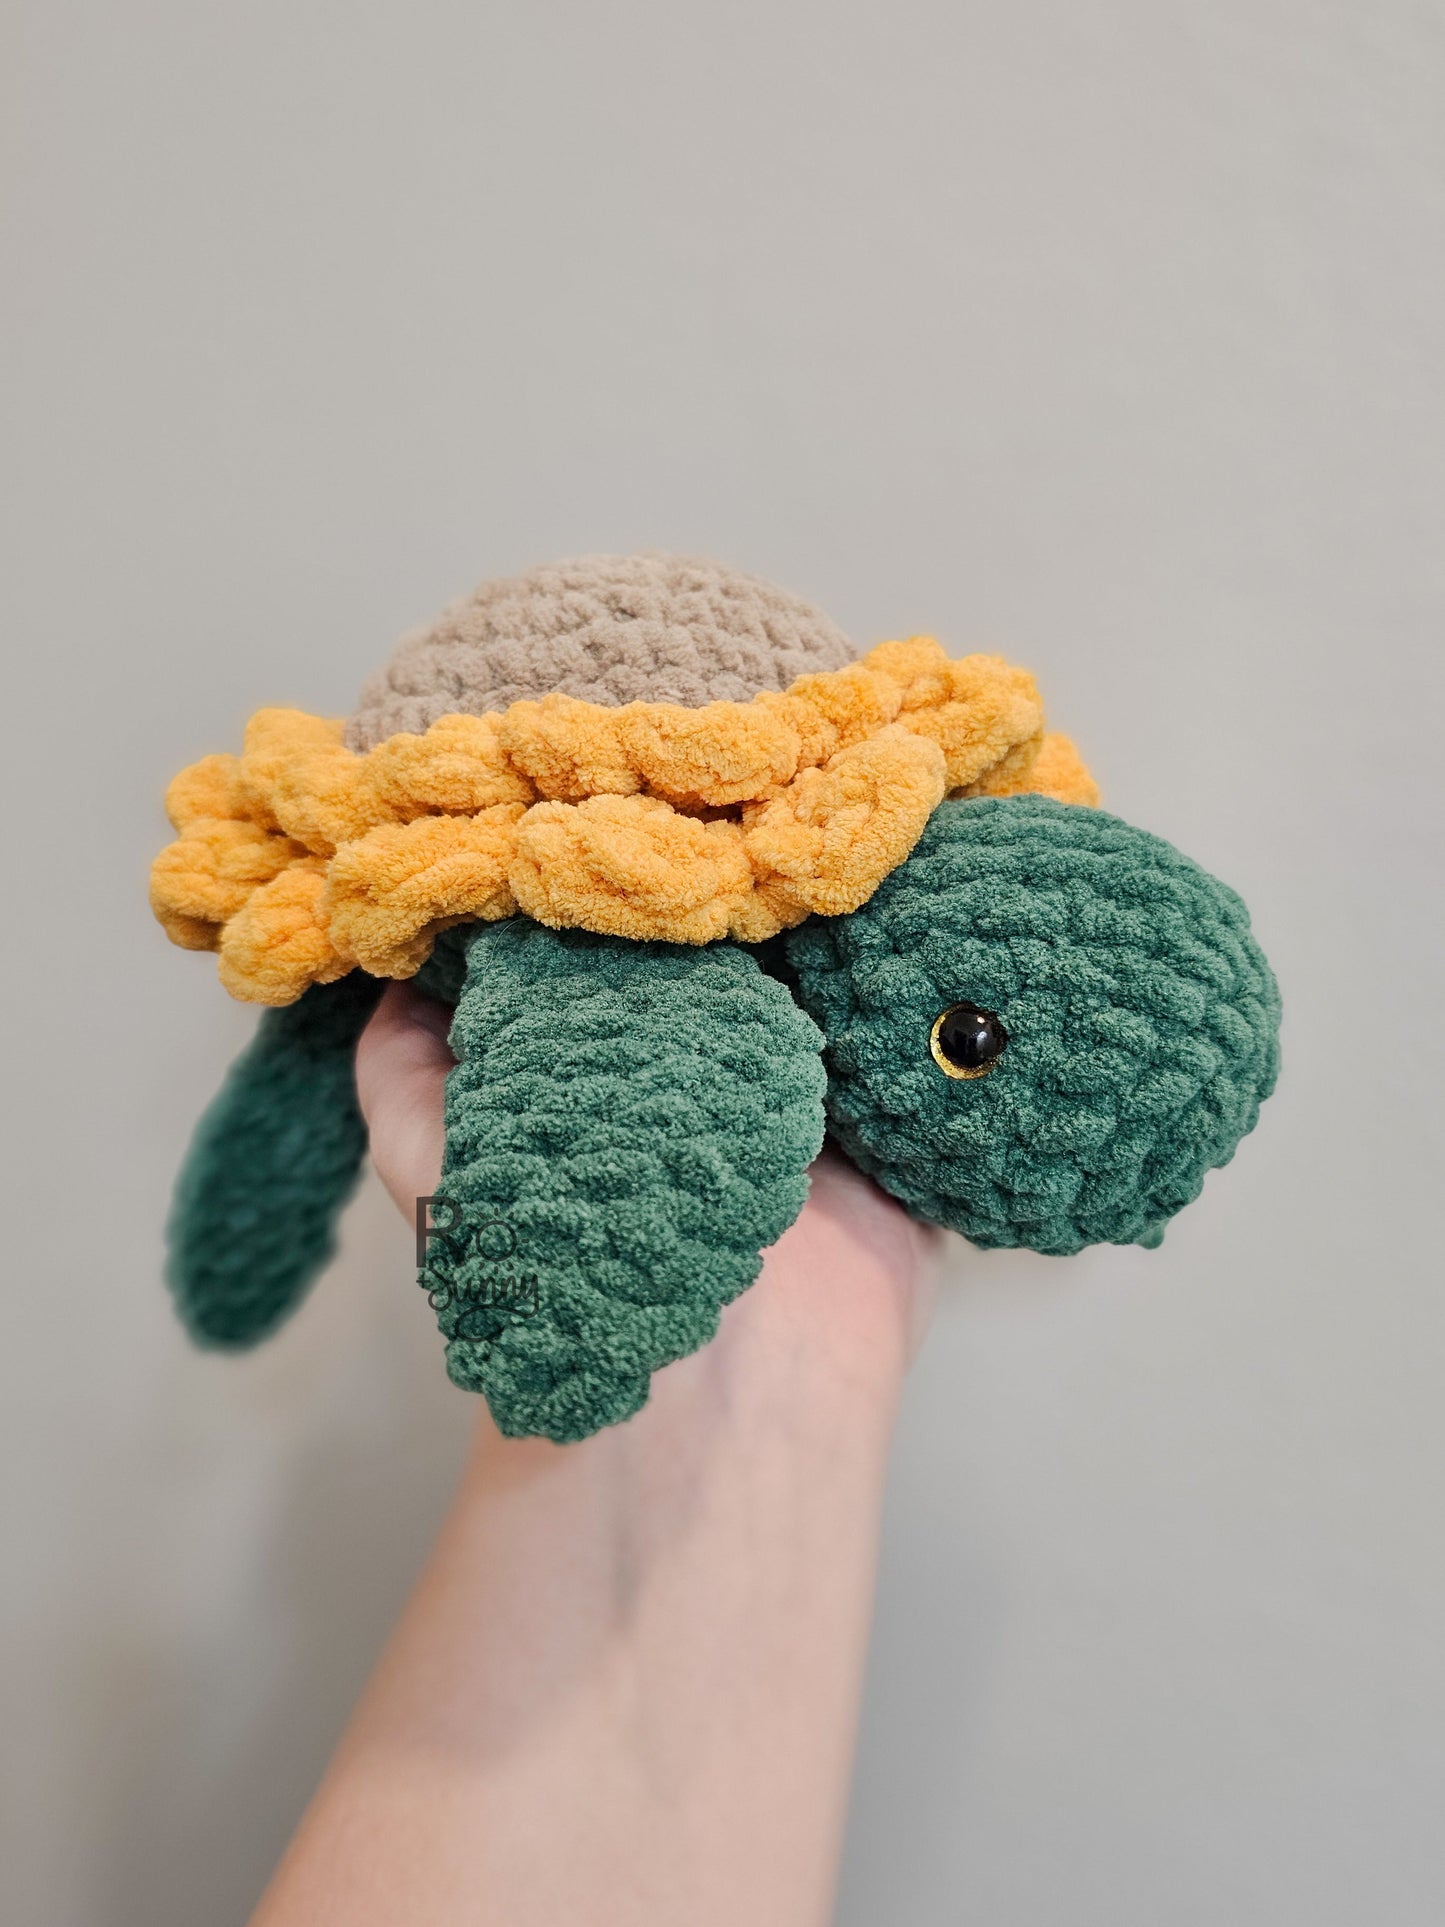 Sunflower, Side Profile View - Crochet sea turtle with a forest green body and golden yellow sunflower shell. The center of the sunflower is sandy brown. 